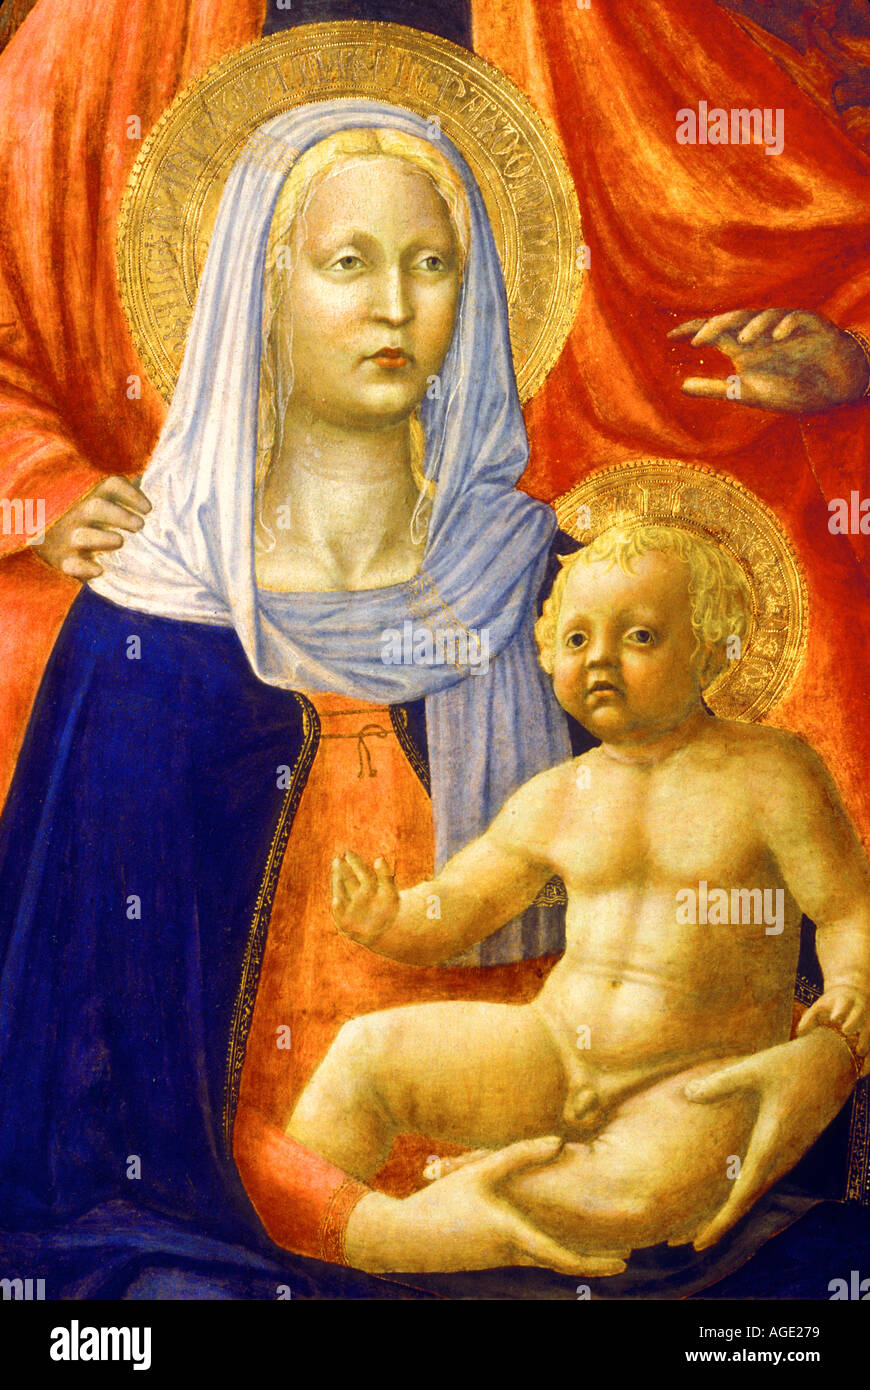 DETAIL OF MADONNA BY FRA ANGELICO IN UFFIZI GALLERY FLORENCE TUSCANY ITALY Stock Photo